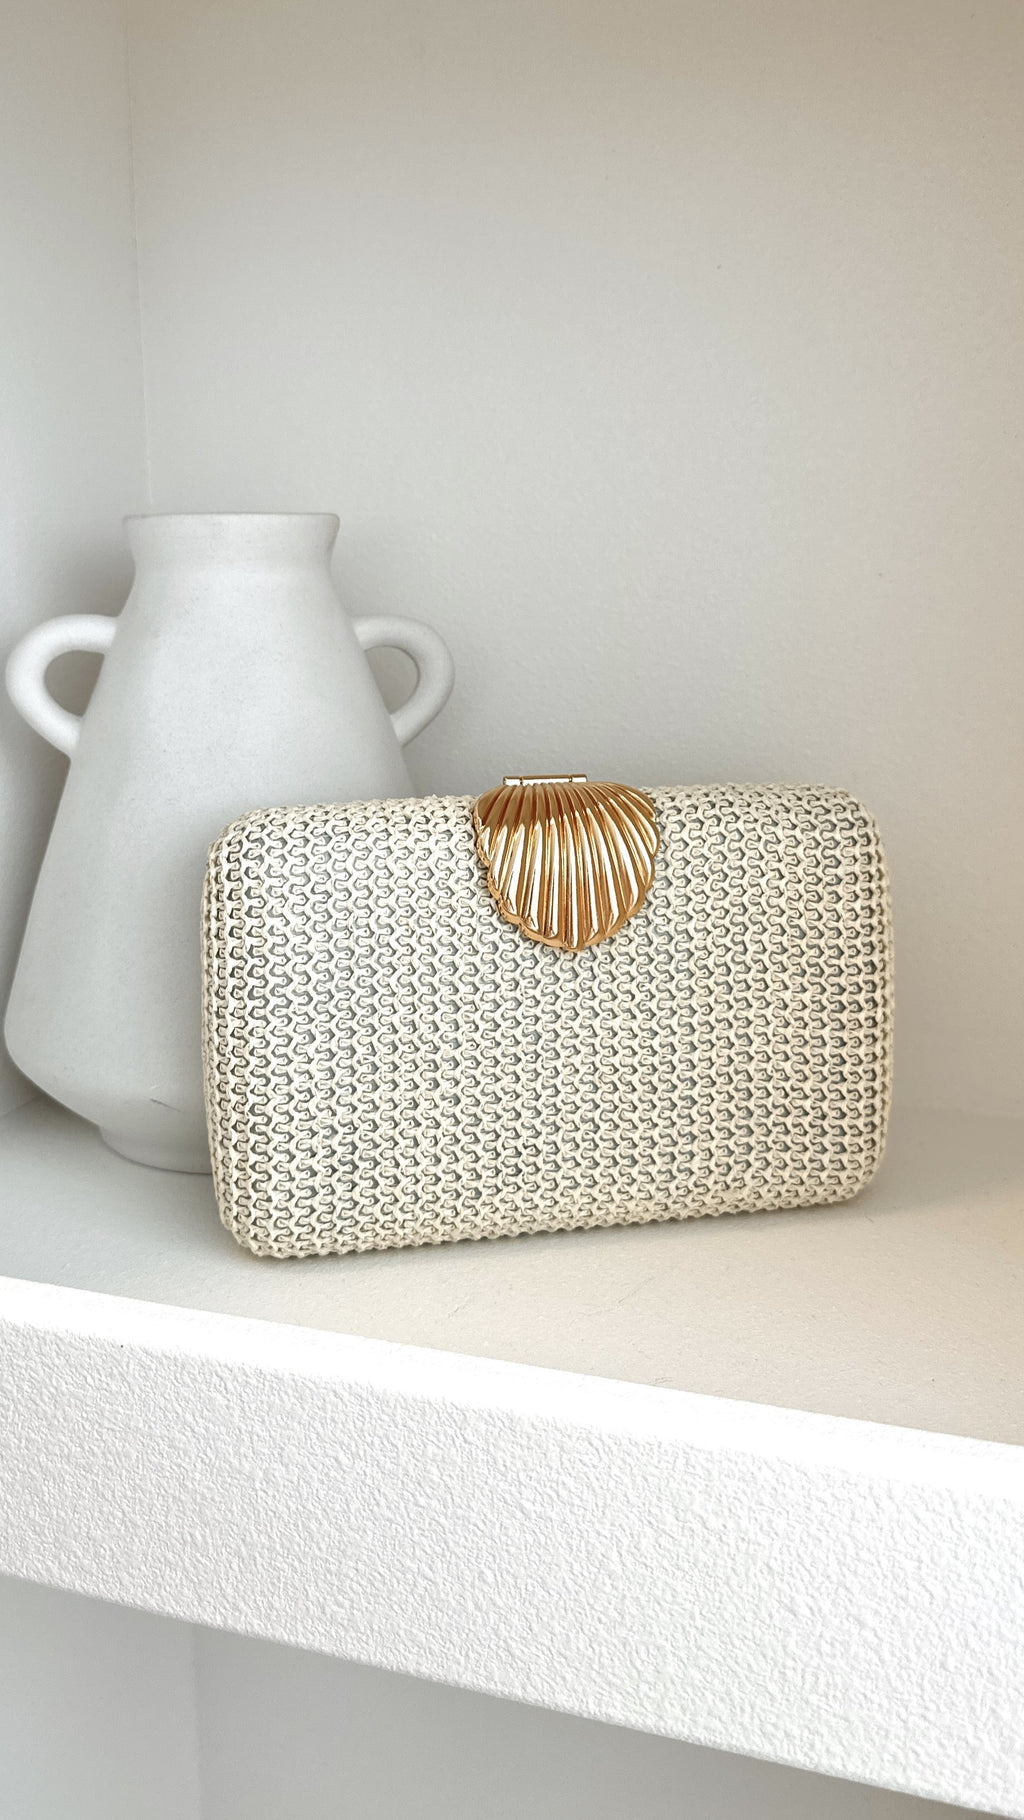 Livy Shell Clasp Woven Structured Clutch - Cream